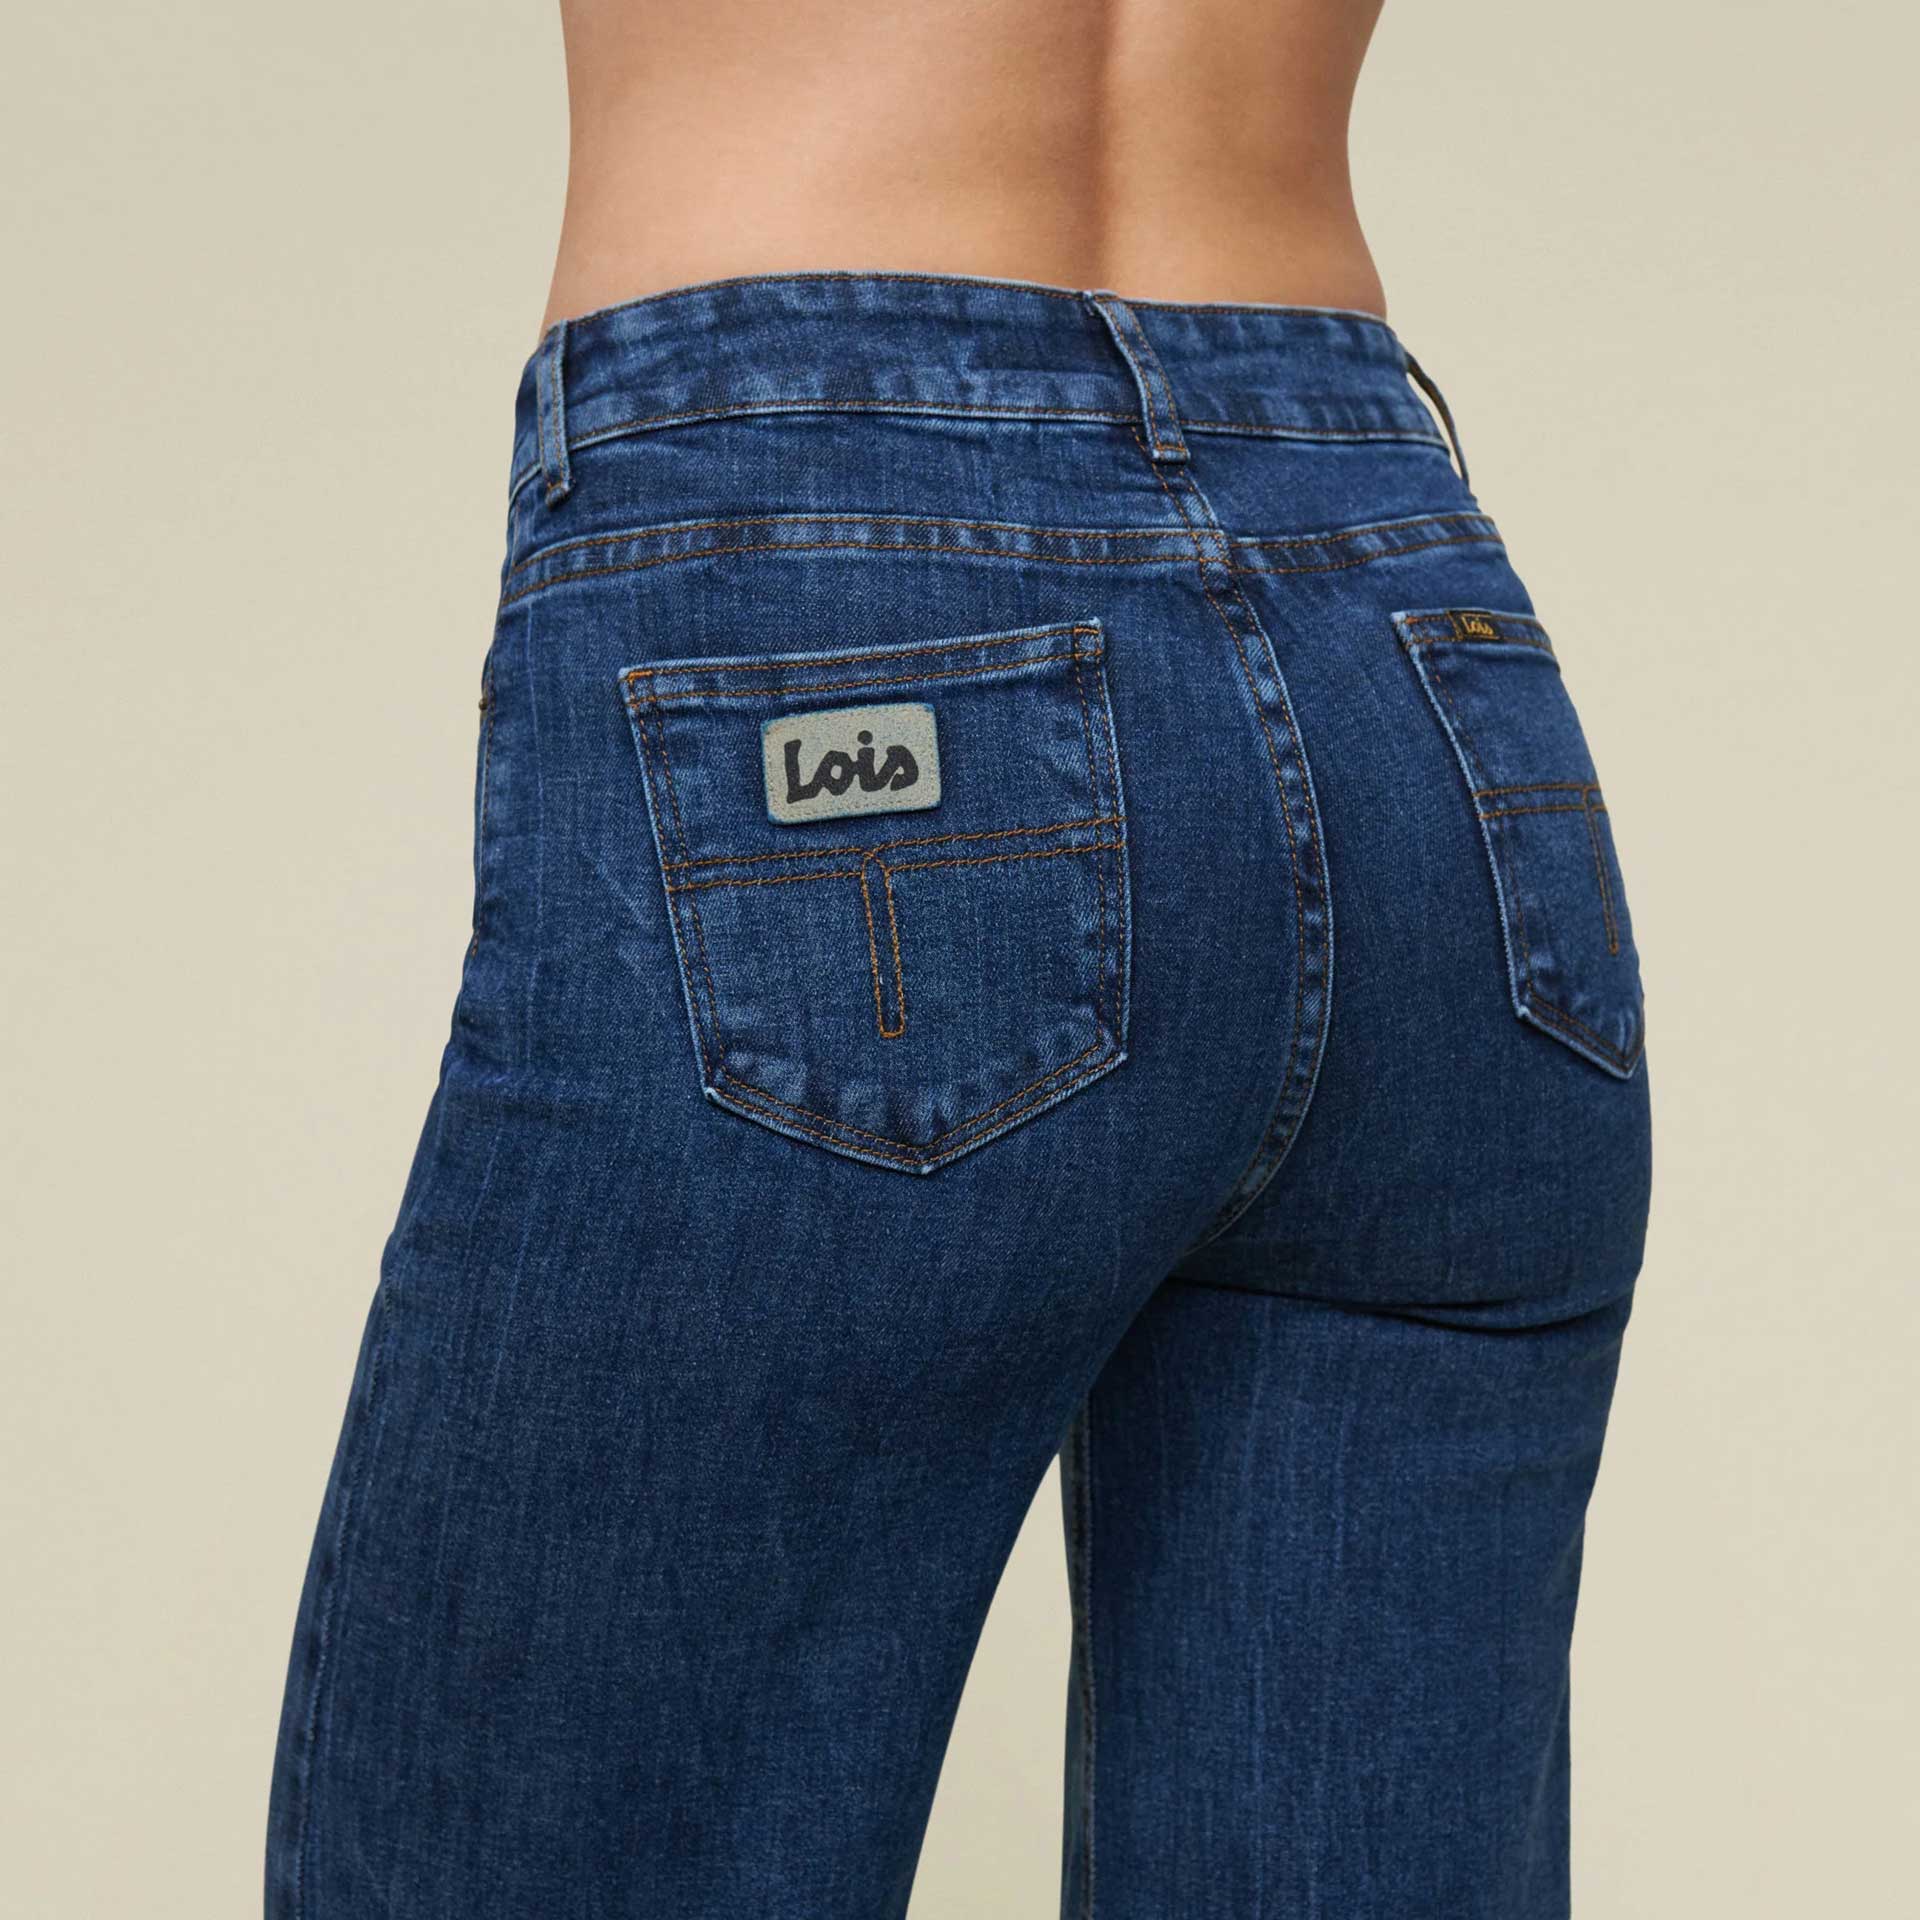 Lois jeans Jeans Palazzo 3